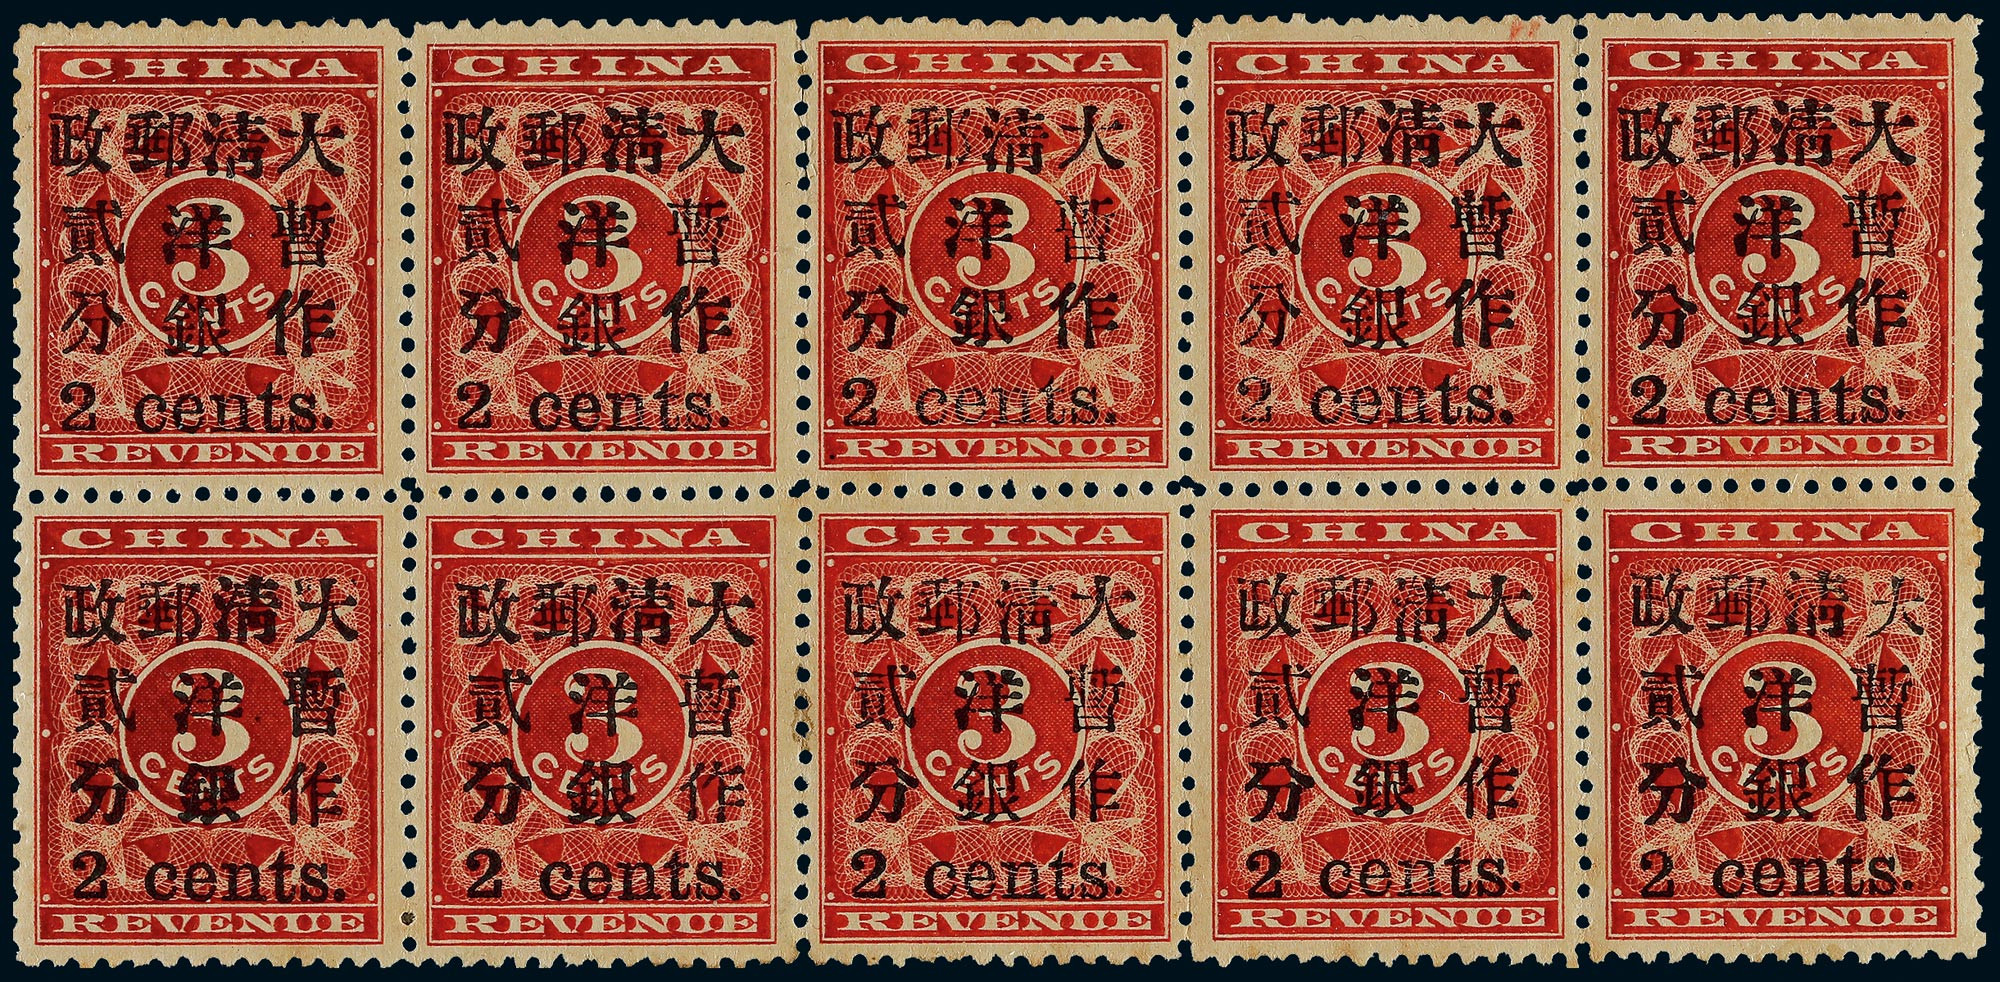 1897 Red Renvenue Small 2 Cents mint block of 10. Position 6-10 and 16-20. VF mint or MNH.